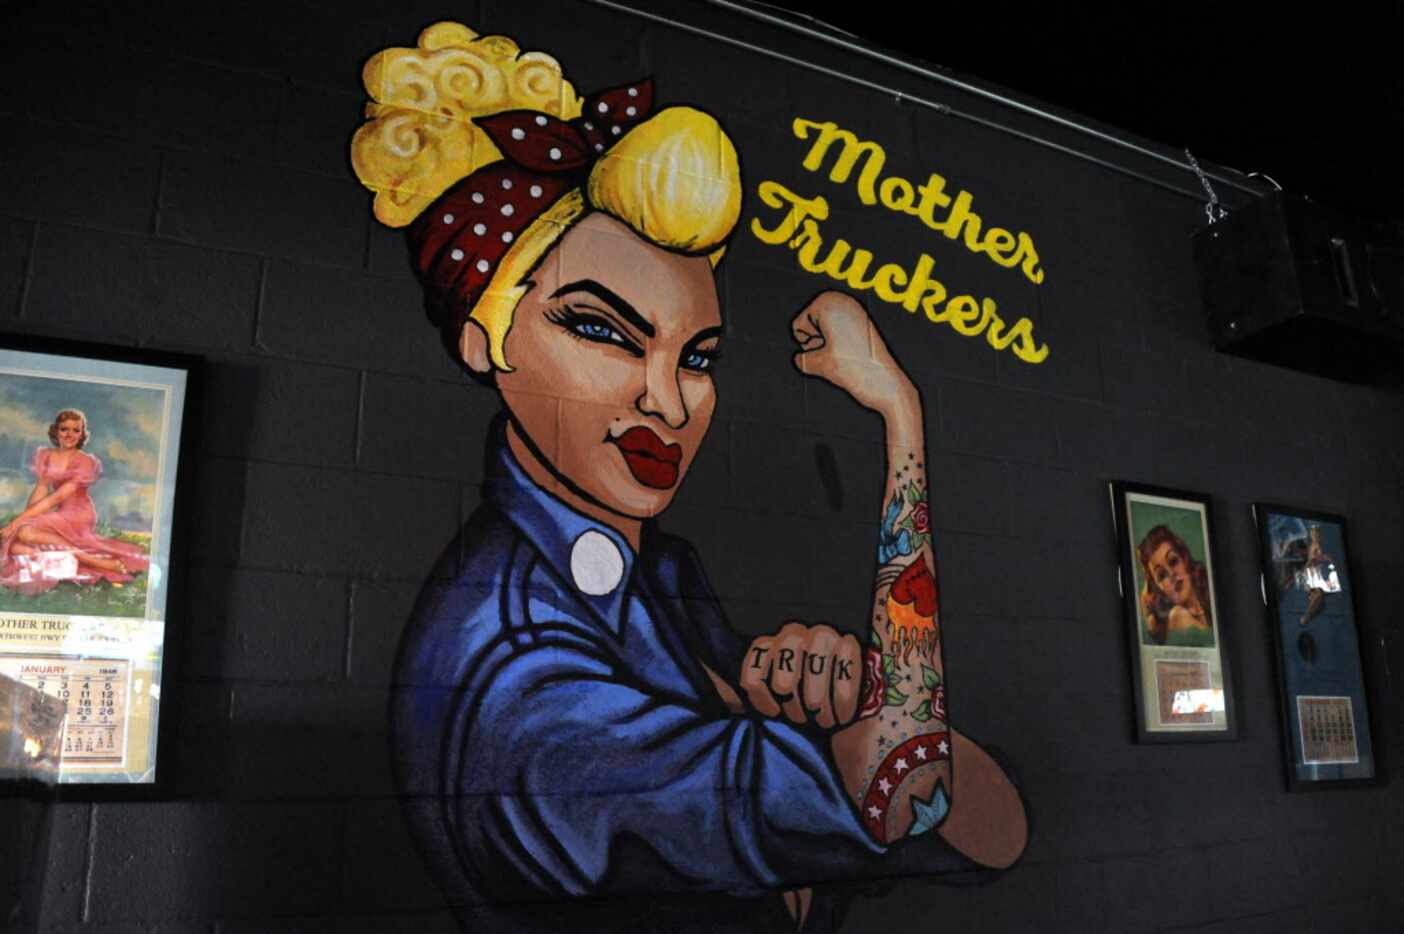 A Mother Truckers mural is painted on a wall.